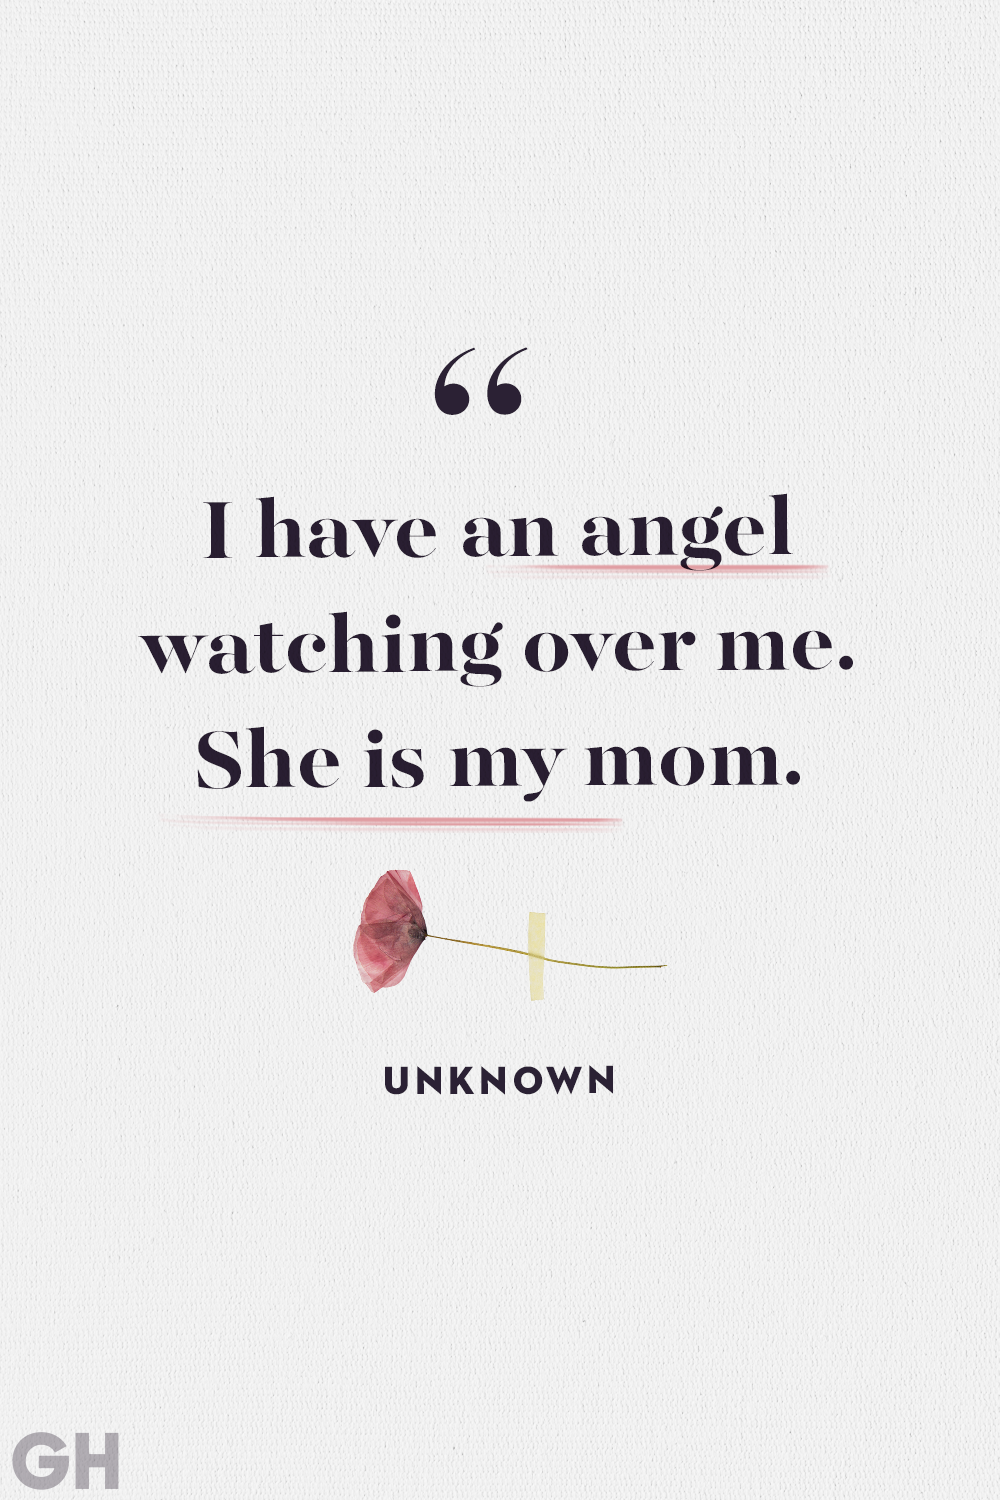 44 Thoughtful Loss of Mother Quotes - Quotes About Losing a Mom